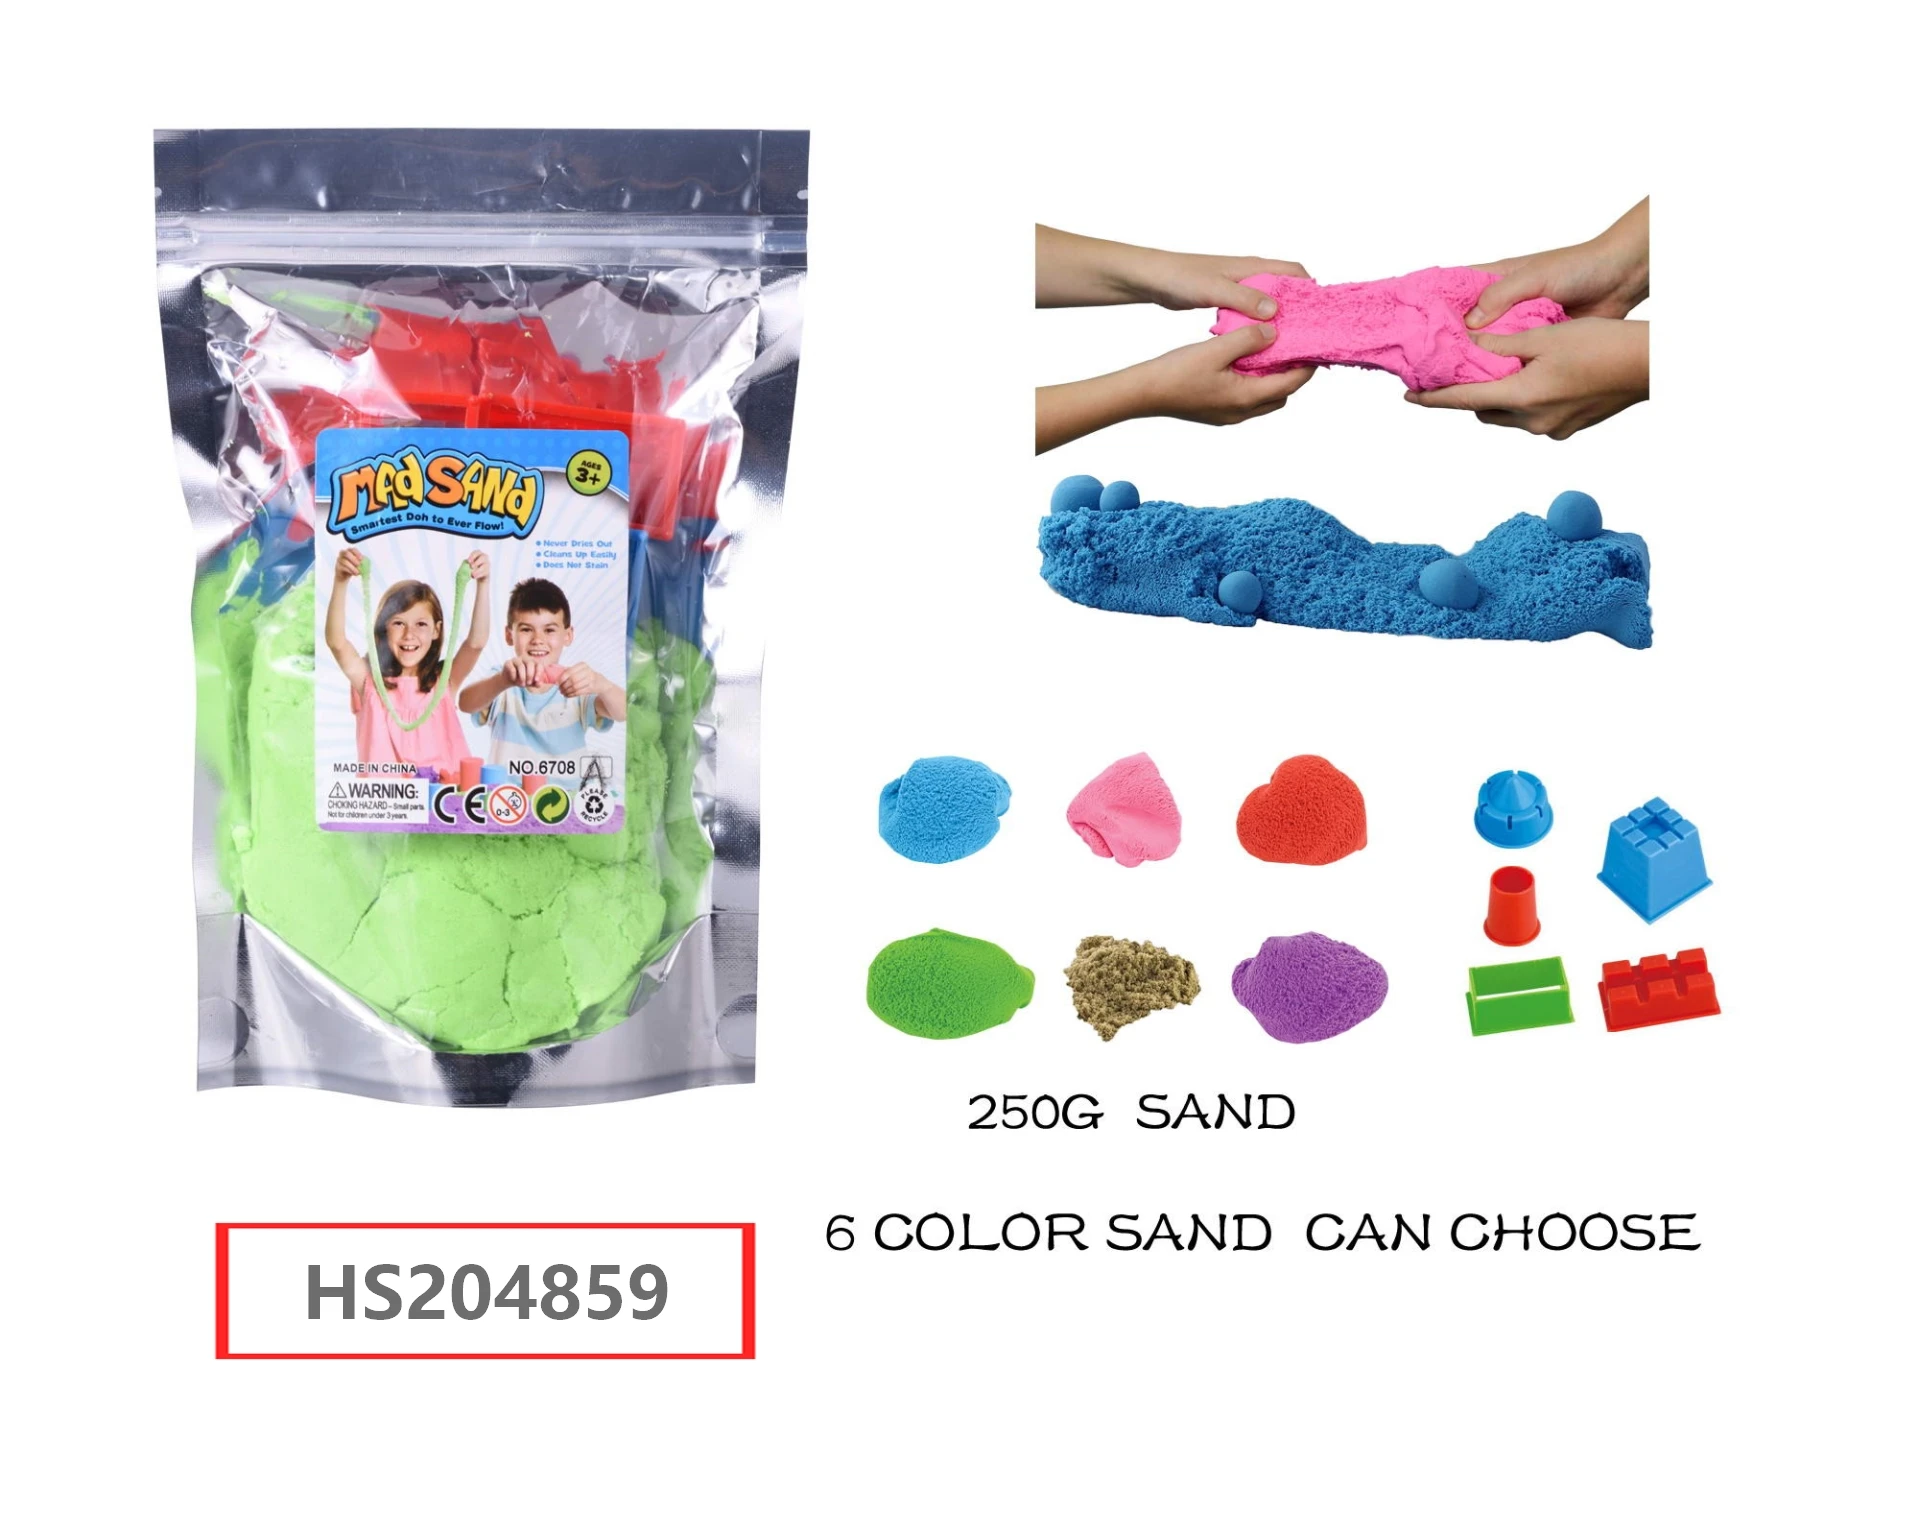 HS204859, Huwsin Toys, Educational toy, DIY Mad sand